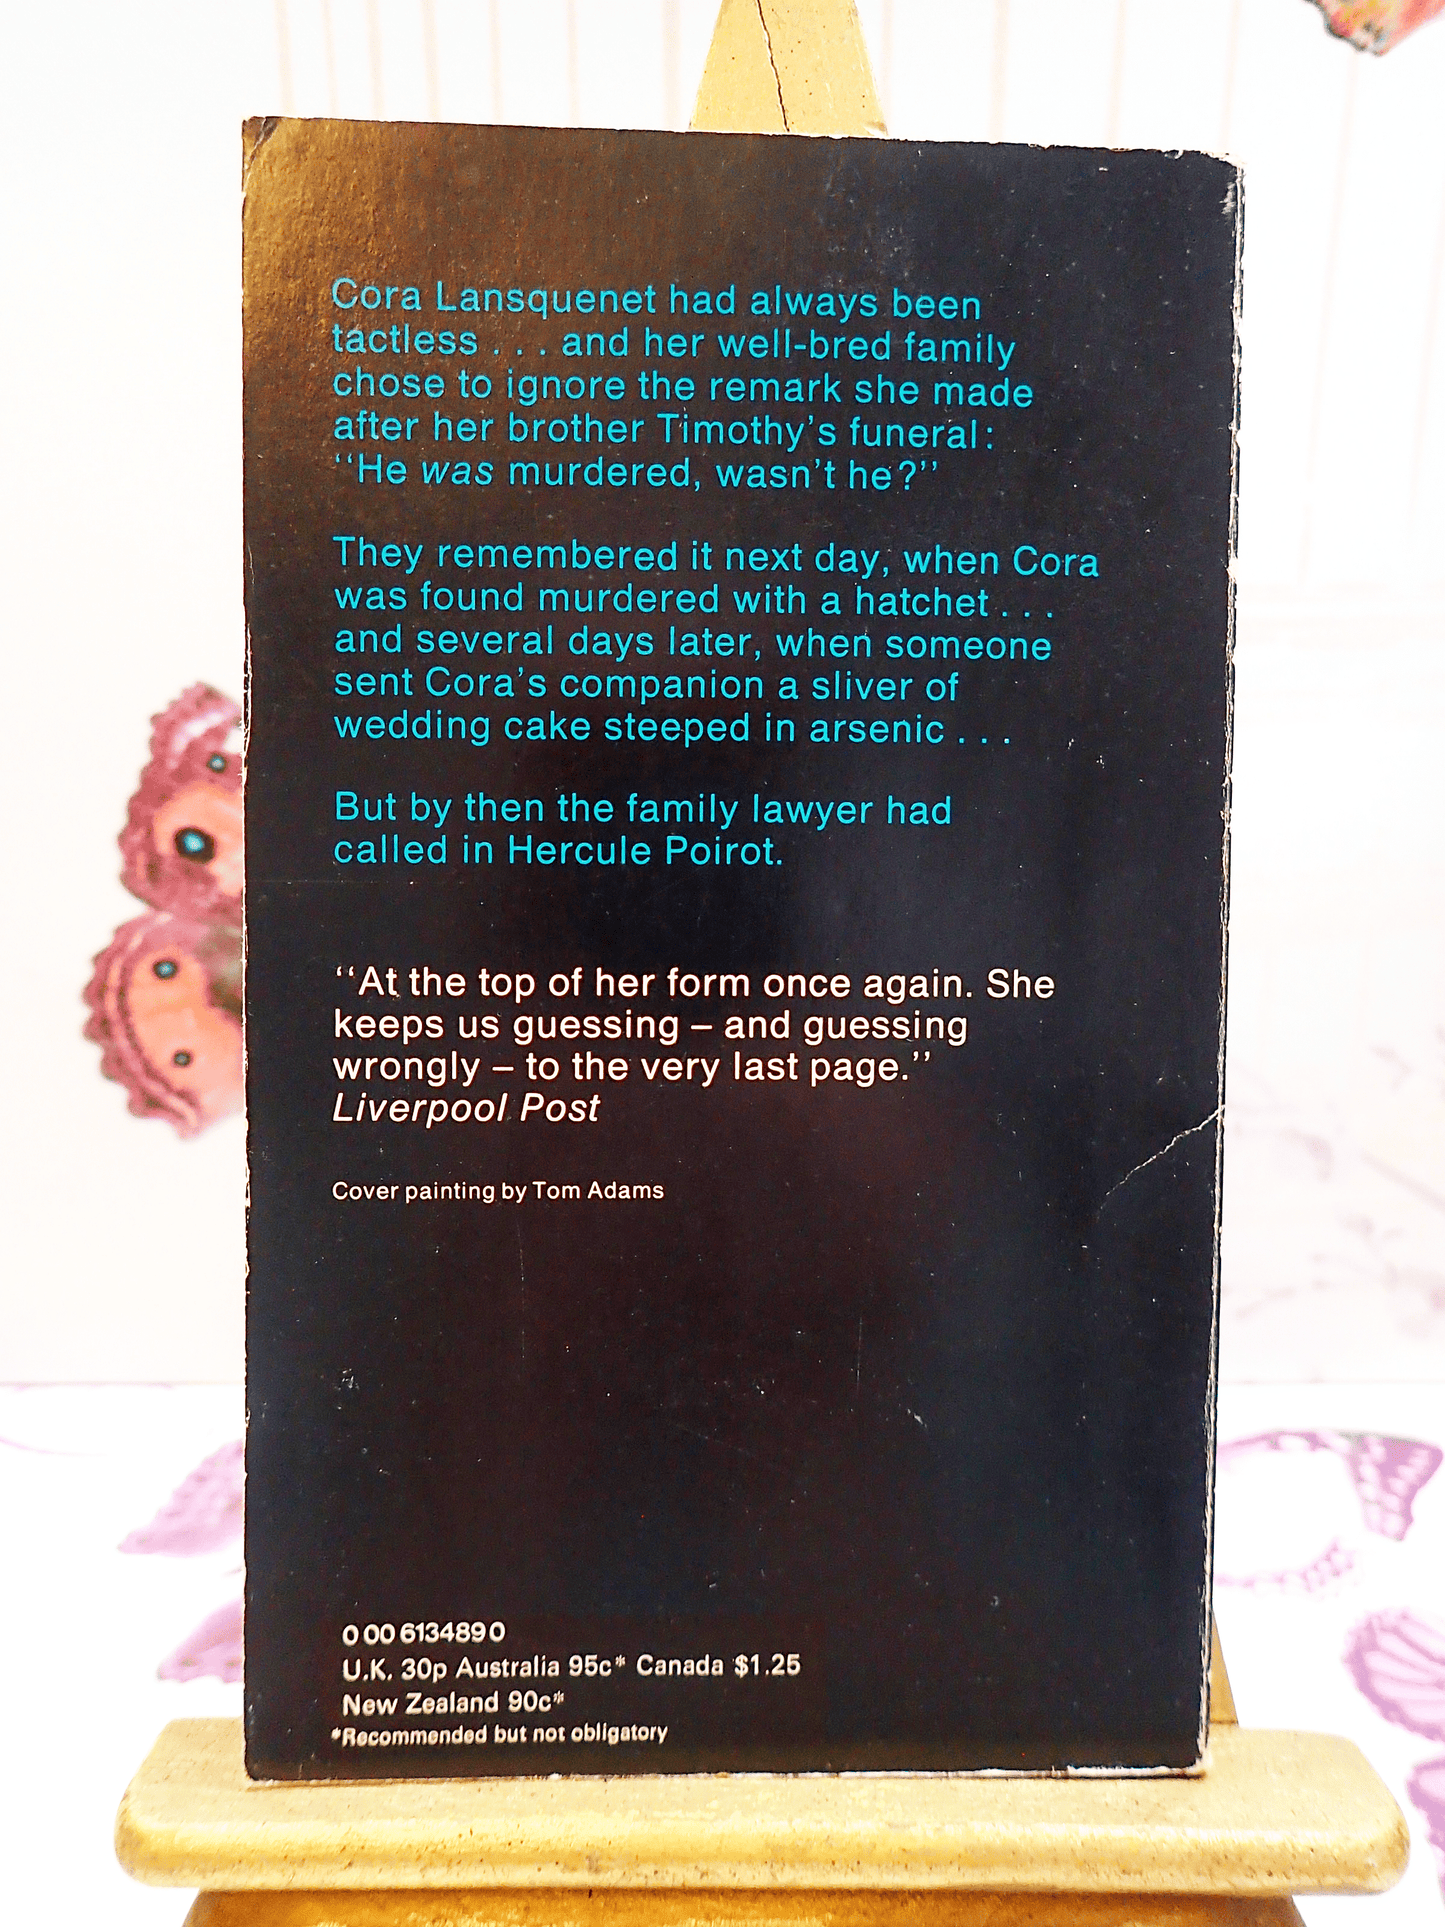 Front cover of After the Funeral by Agatha Christie Vintage Paperback Book Crime Classic 1970's, showing blurb. 'Cora Lansquenet had always been tactless..."